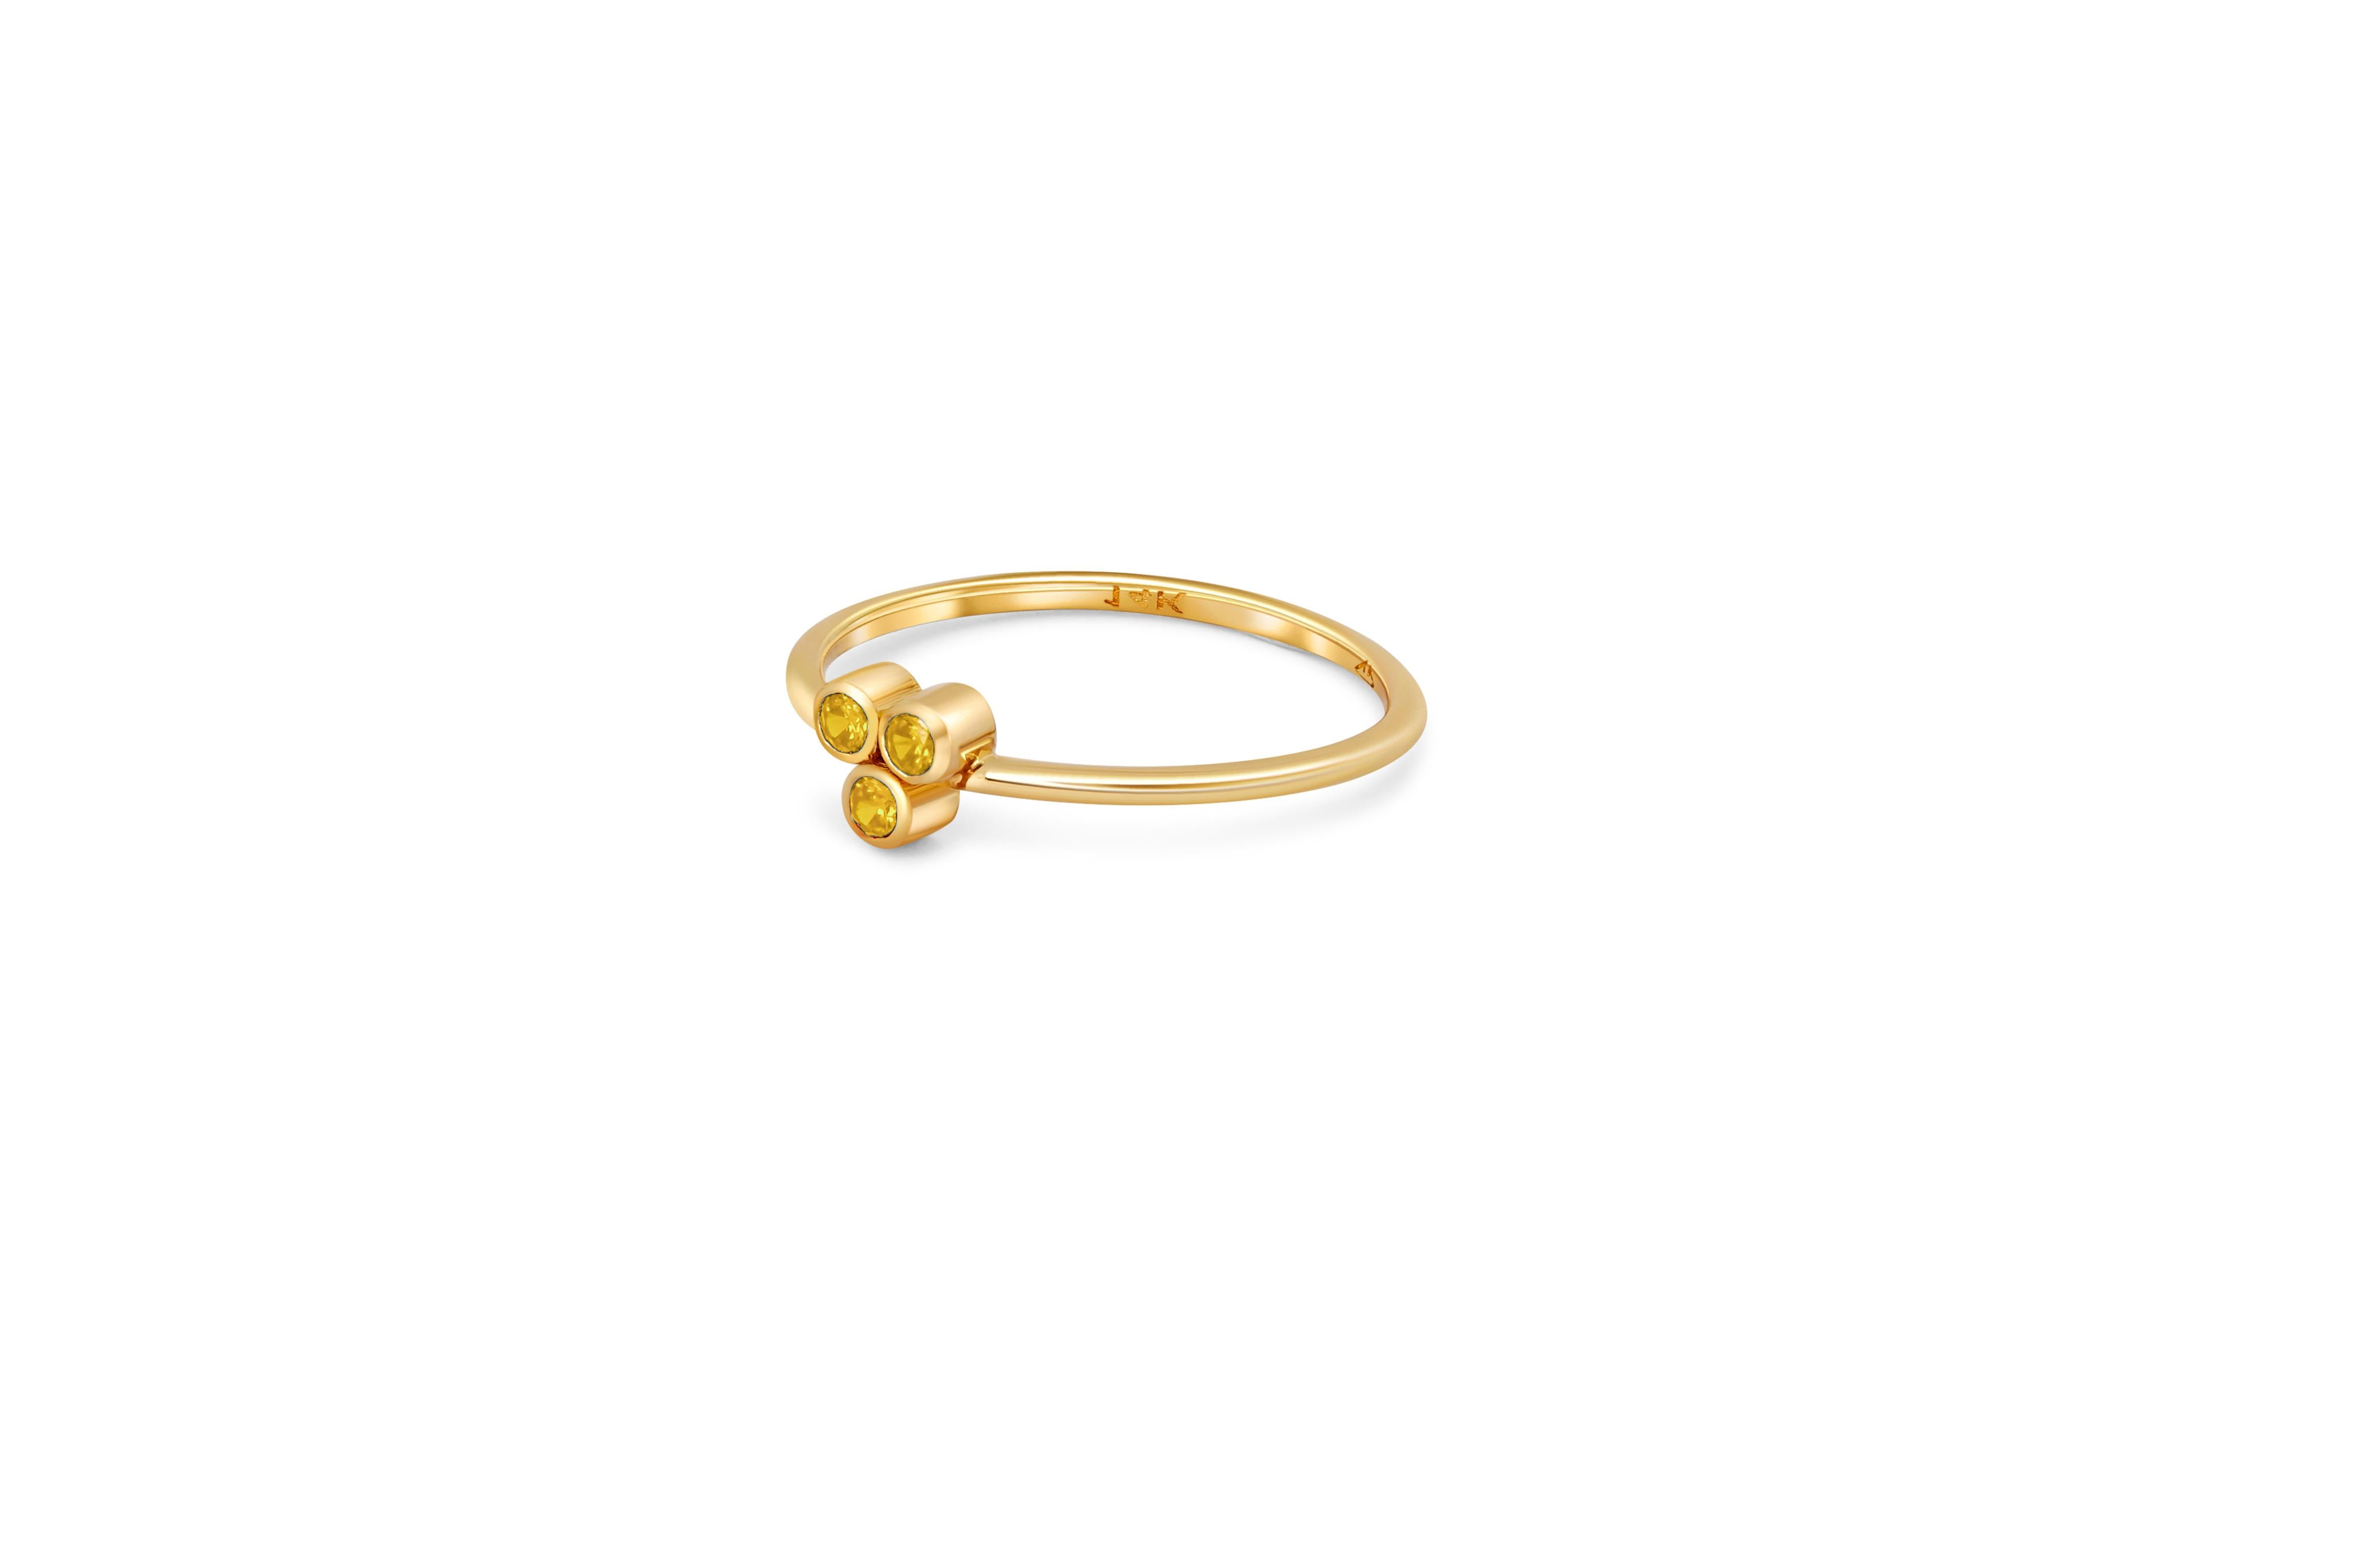 Yellow Three Stone 14k gold ring.  Triple Stone Ring. Minimalist yellow sapphire ring. Dainty gemstone Ring. Thin Band Ring. Stacking Band Ring.

Metal: 14k gold
Weight: 1.8 gr depends from size
Lab sapphire , 3 stone, yellow color, round brilliant